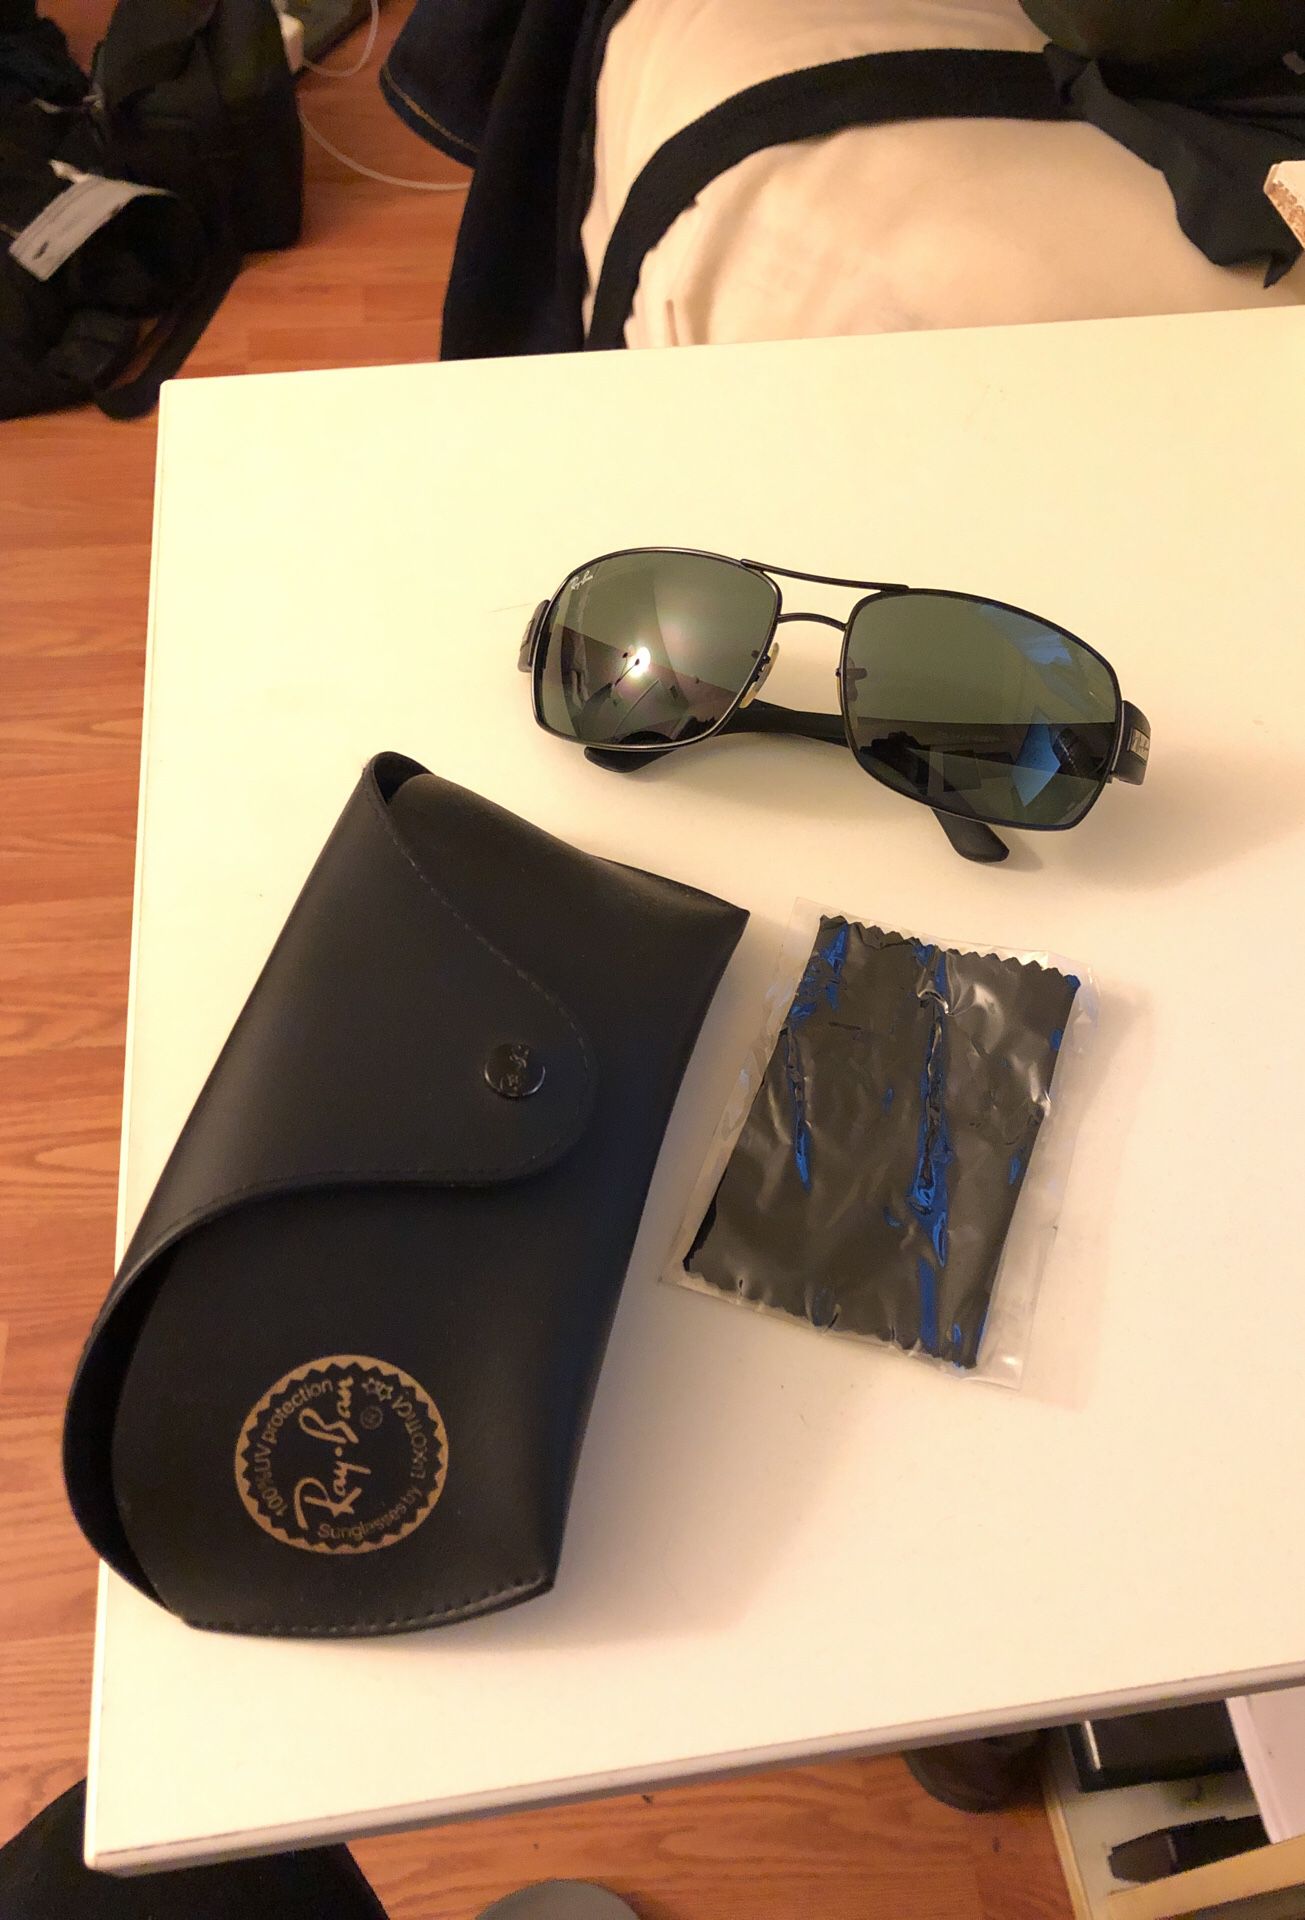 Motley melodi Necklet Ray Ban RB 3426 Made in Italy sunglasses for Sale in Lake View Terrace, CA  - OfferUp